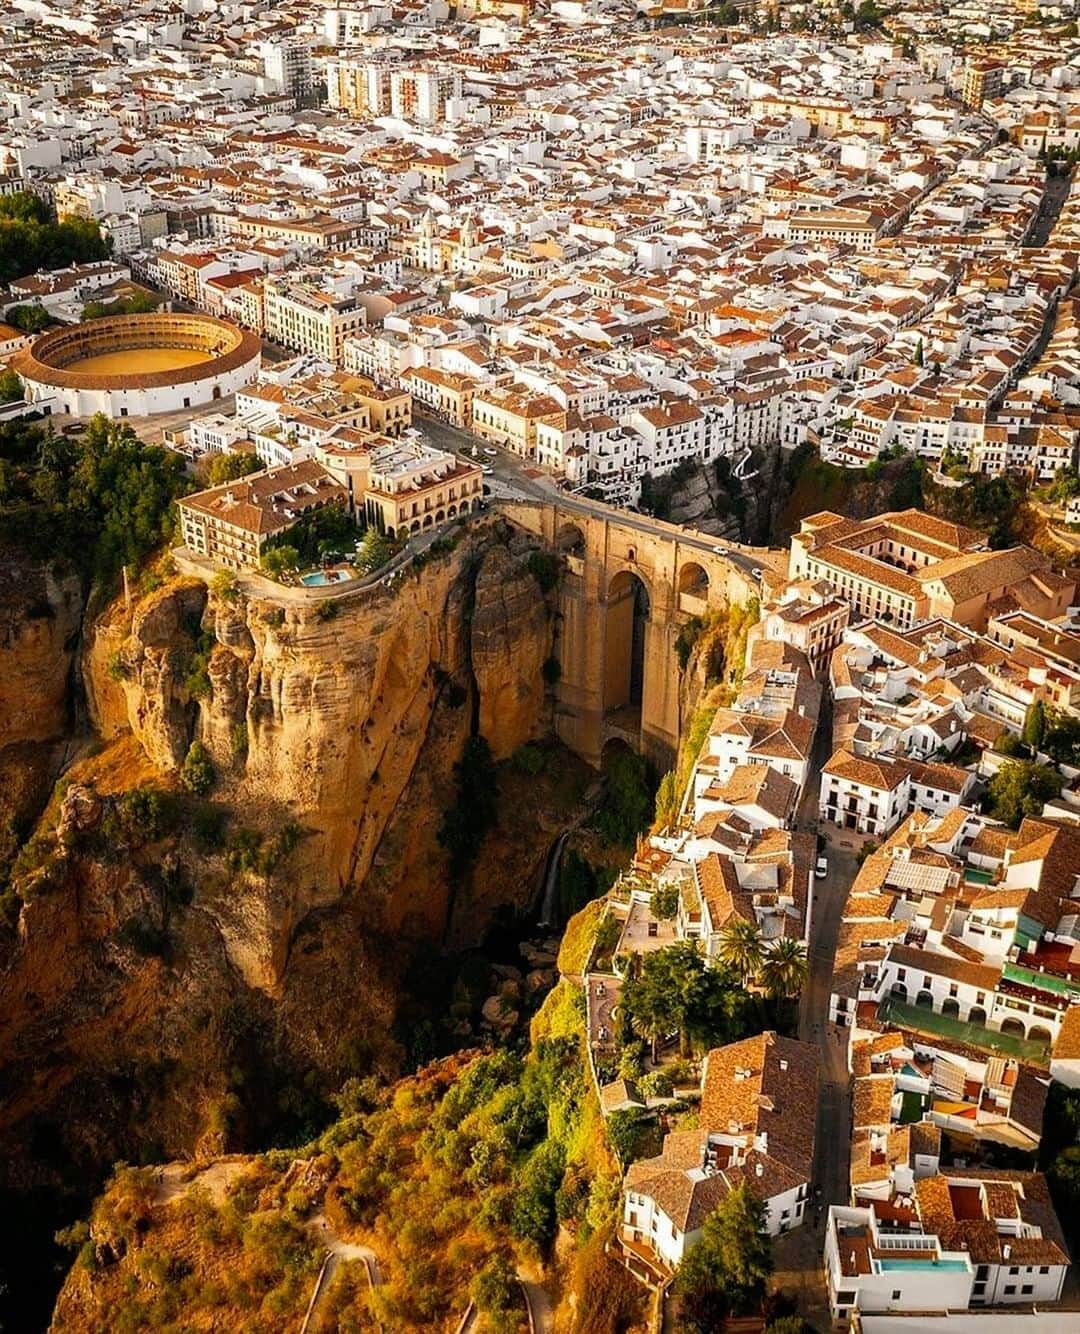 Architecture - Housesのインスタグラム：「⁣ Ronda is one of the oldest cities in Spain ⤵️⁣⁣ ⁣ The new bridge symbolises the soul of the city and, despite its name, is more than 200 years old. Built at a height of 98 metres, it is the bridge over the canyon known as the Tajo de Ronda and over which the river Guadalevín flows. It connects the old and modern quarters of the city. 🥰🥰⁣ ⁣ Have you ever been to Ronda? Doble tap if you like it ♥️♥️⁣ ⁣ _____⁣⁣⁣⁣⁣⁣⁣⁣⁣⁣⁣ 📸 @wanderreds⁣ 📍Ronda, Málaga, Spain⁣ #archidesignhome⁣⁣⁣⁣⁣⁣⁣ _____⁣⁣⁣⁣⁣⁣⁣⁣⁣⁣⁣ #design #architecture #architect #arquitectura #luxury #architettura #archilovers ‎#architecturephotography #amazingarchitecture⁣ #lookingup_architecture #artdepartment #architecturallighting #house #archimodel #architecture_addicted #architecturedaily #arqlovers #Malga #Spain #spain_vacation #spaintravel #spaintrip」